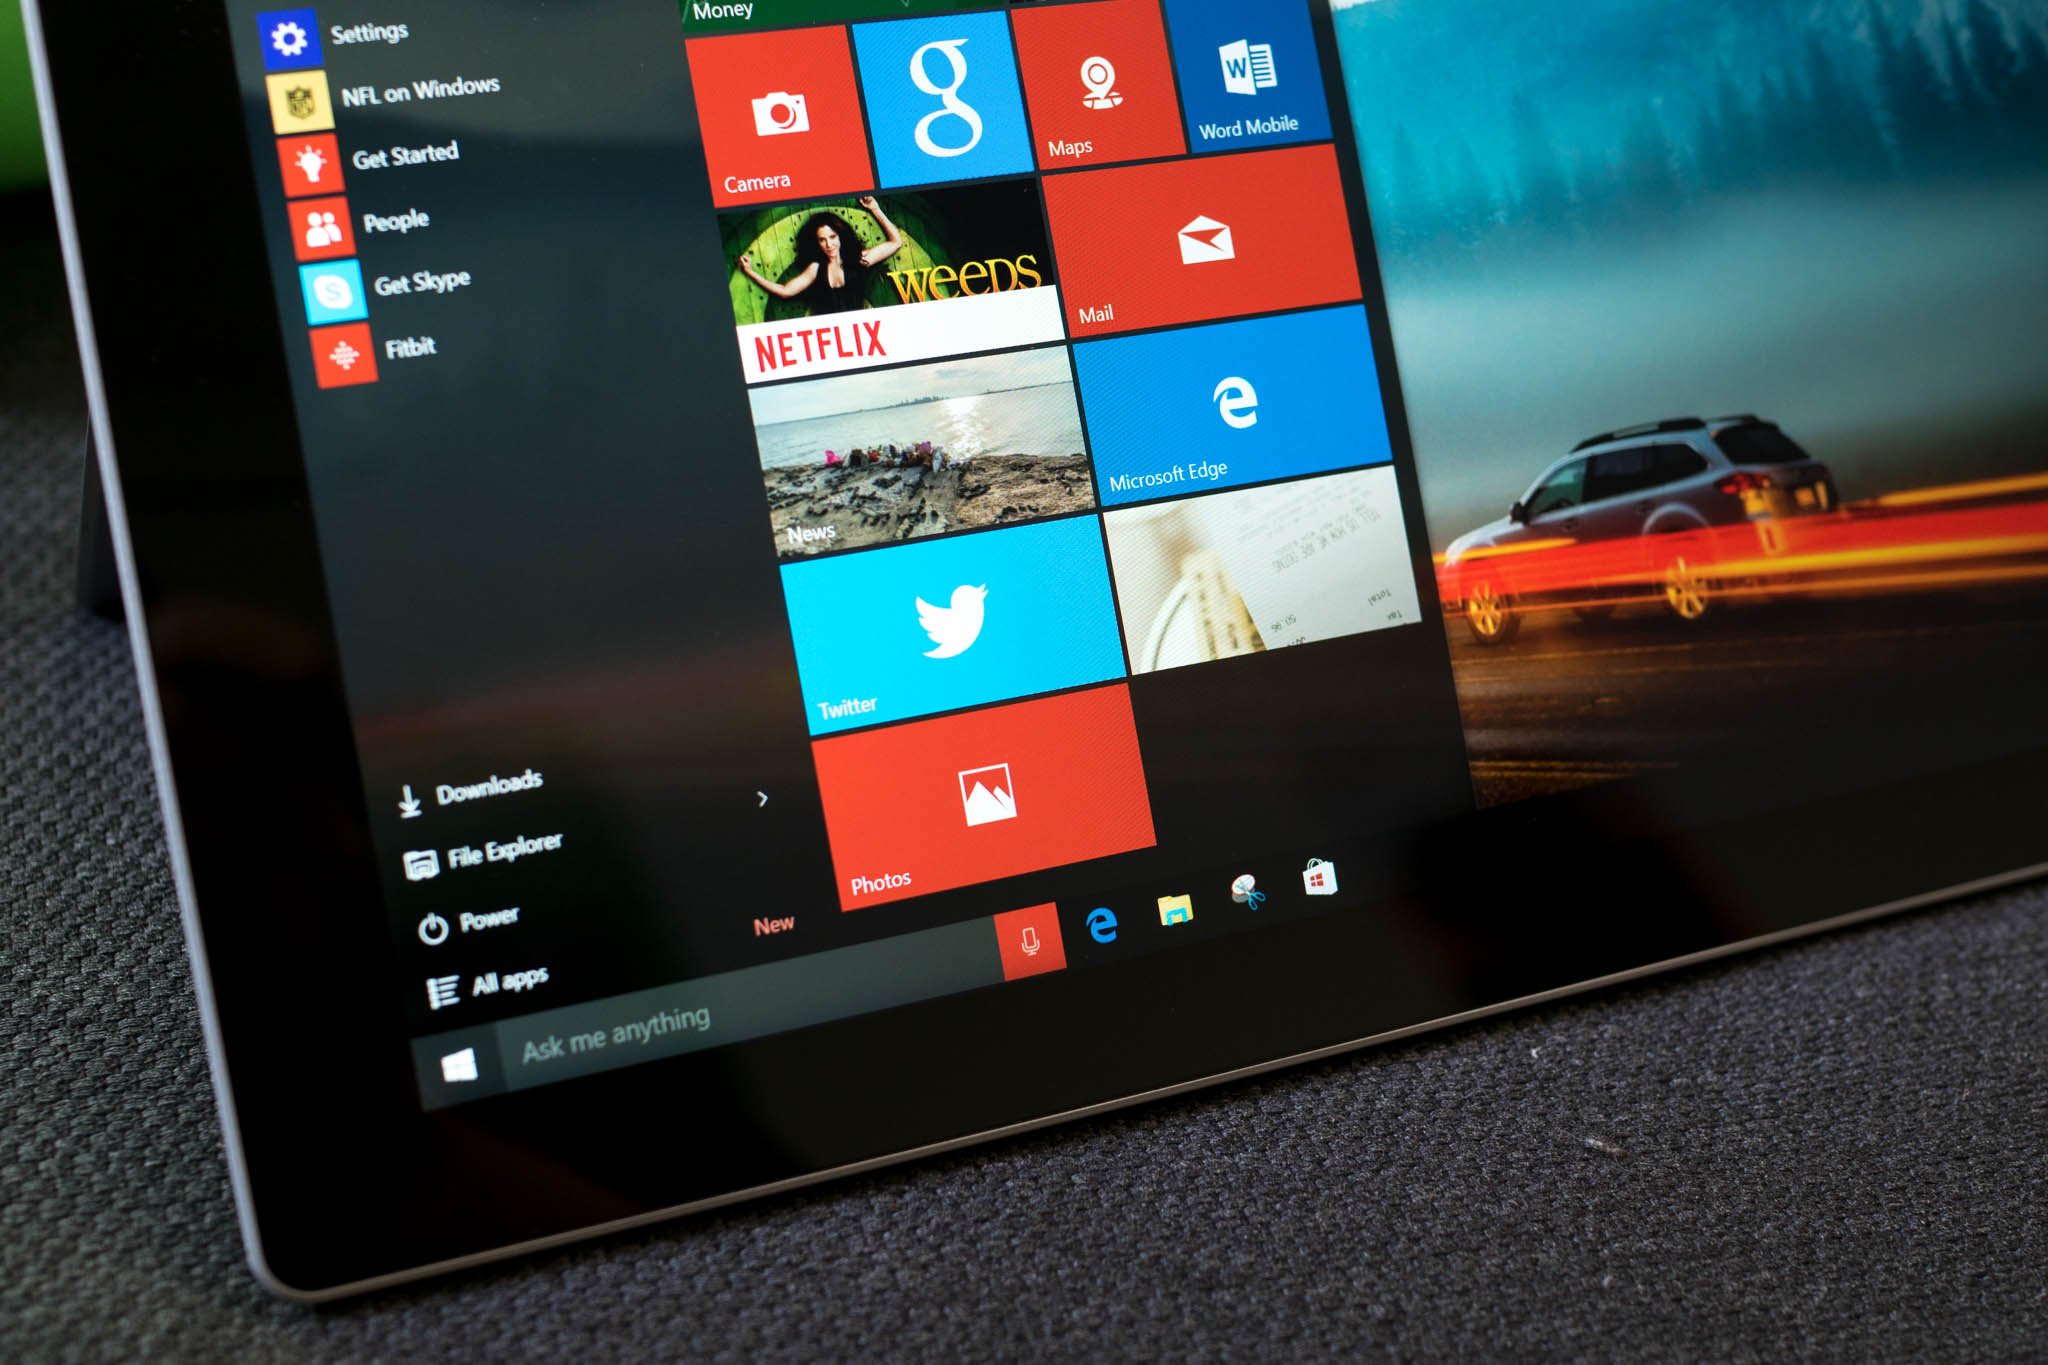 Microsoft releases ISO for Windows 10 PC build 10565